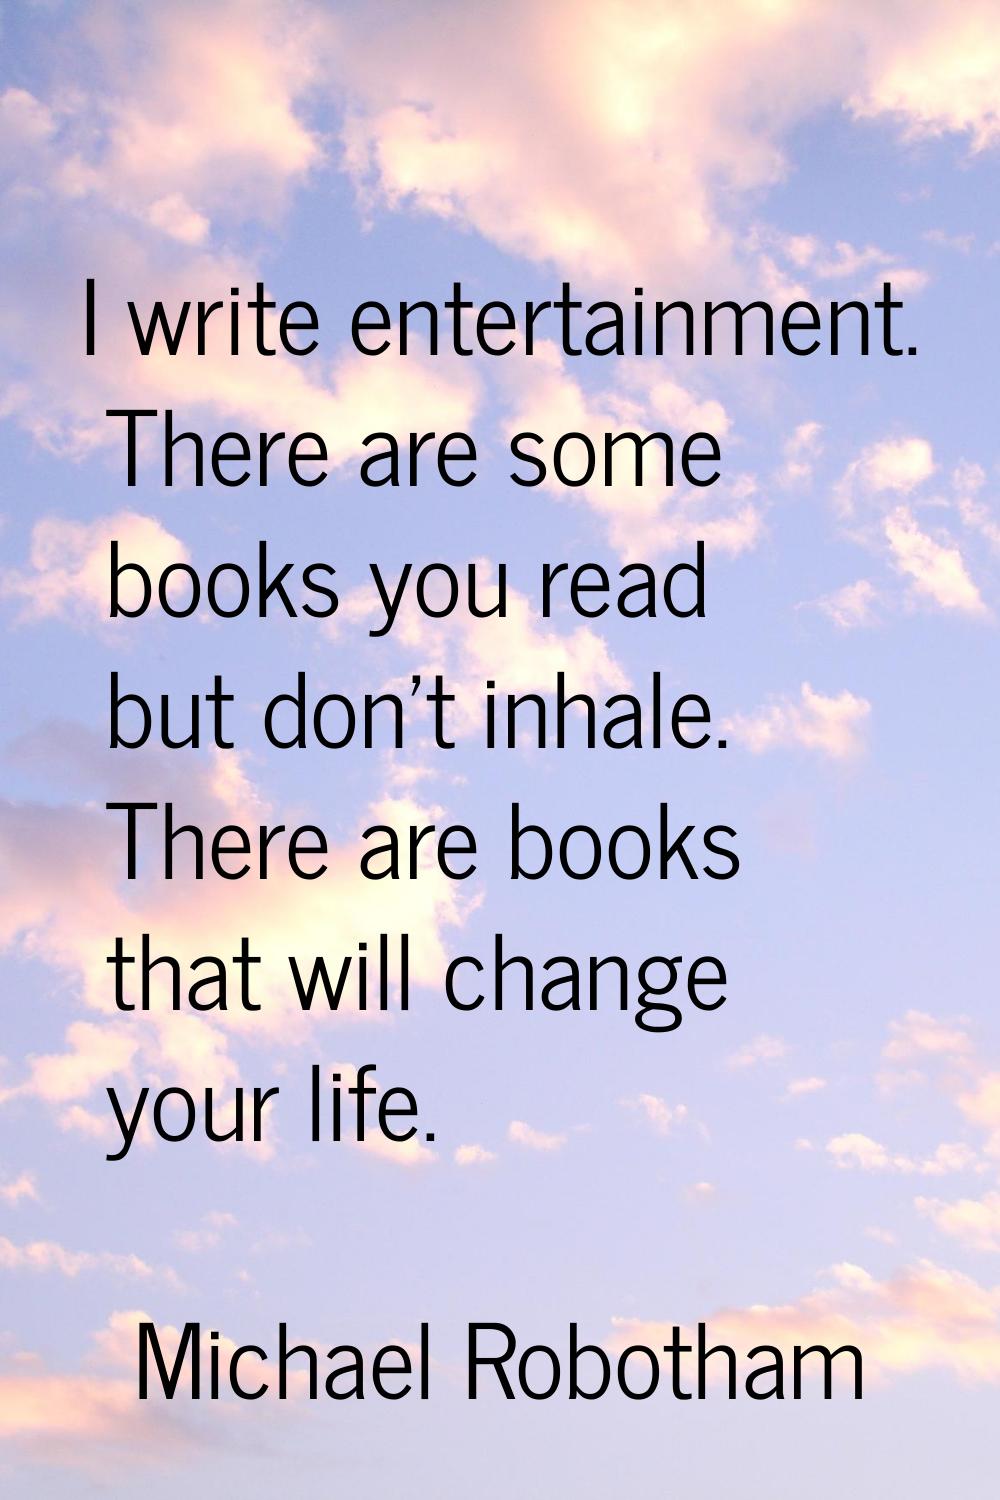 I write entertainment. There are some books you read but don't inhale. There are books that will ch